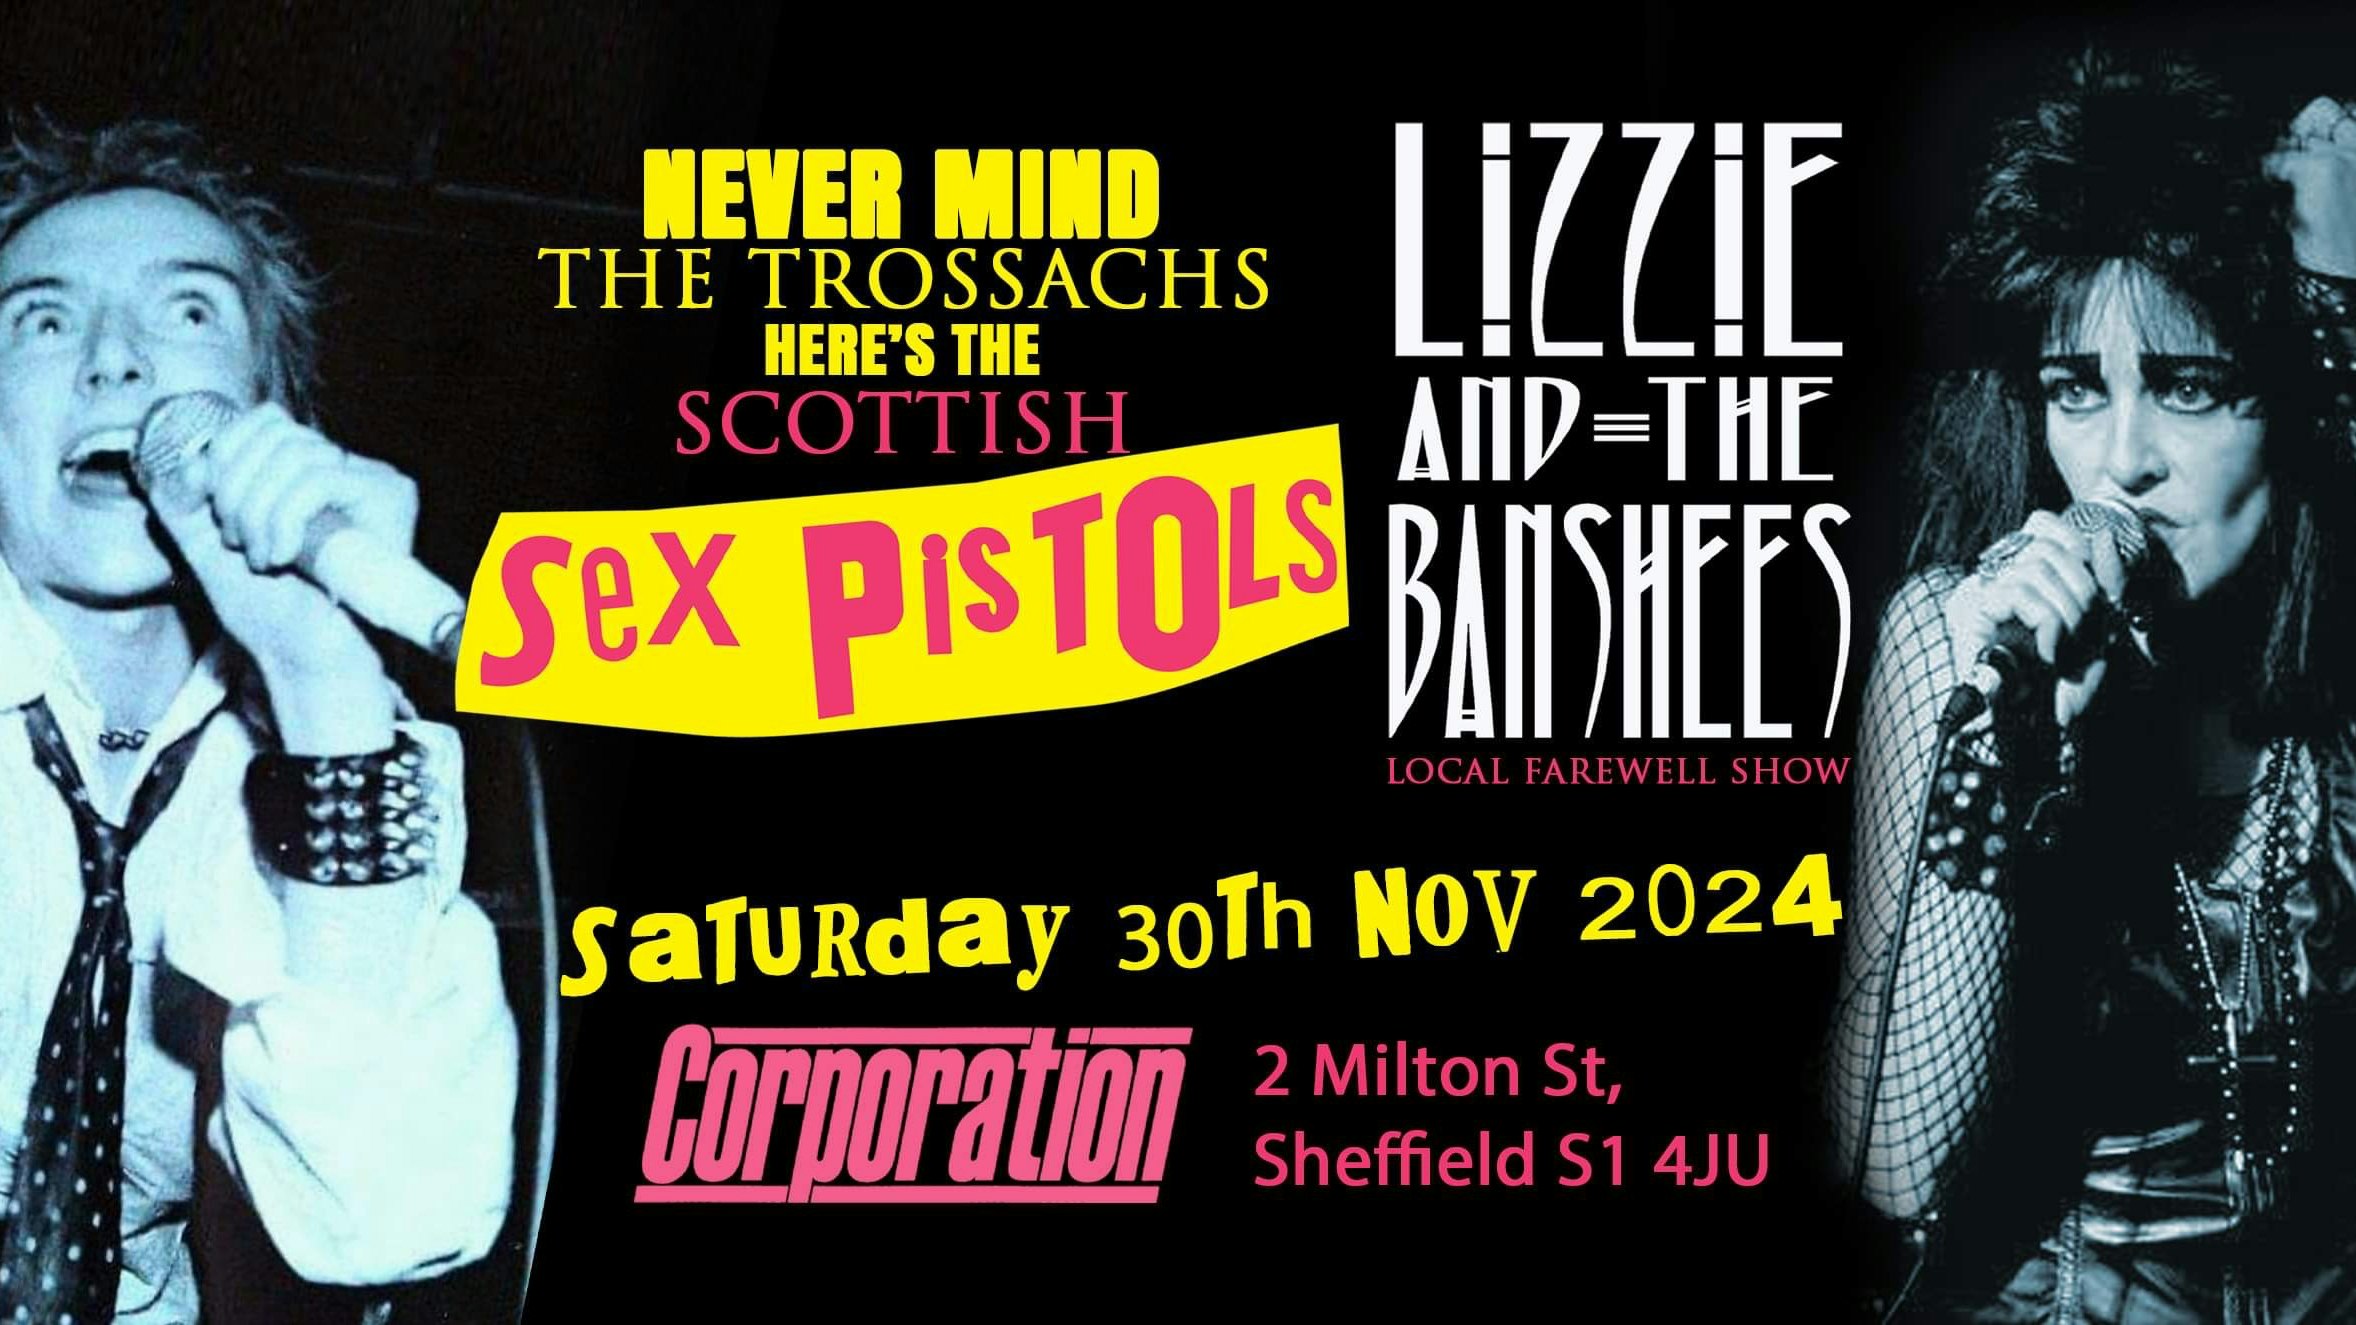 THE SCOTTISH SEX PISTOLS + LIZZIE AND THE BANSHEES